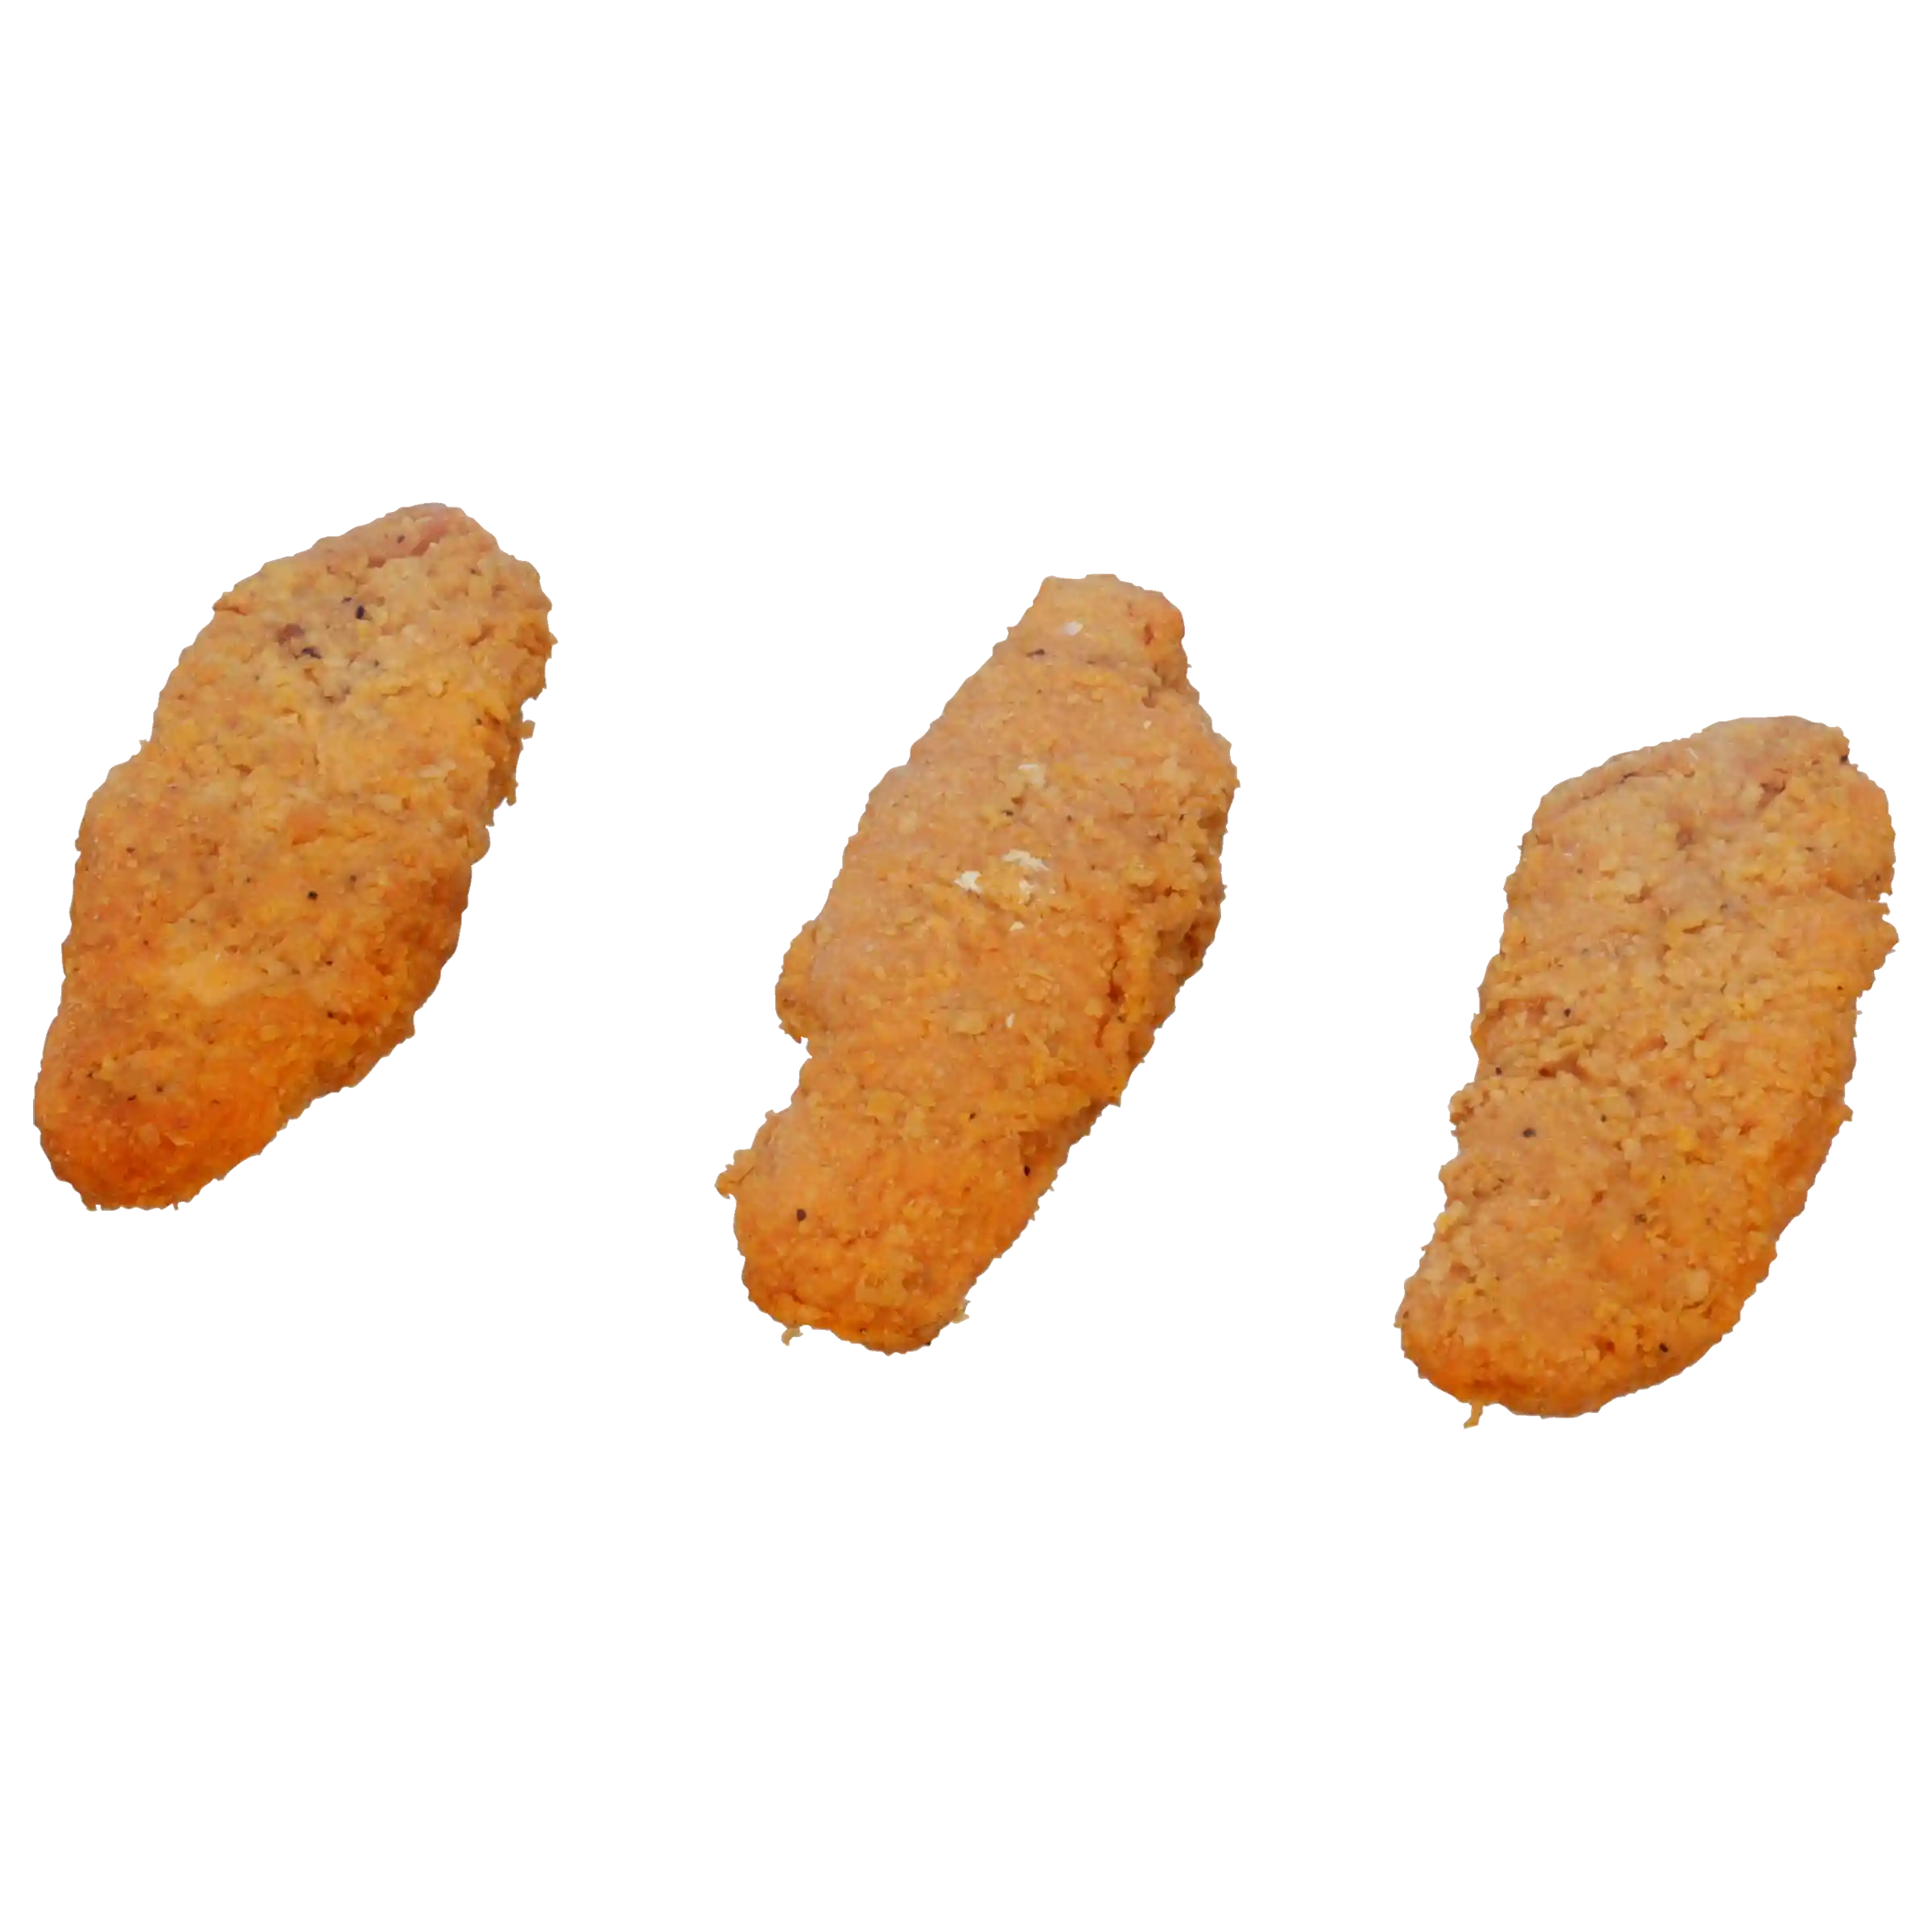 Tyson® Fully Cooked Whole Grain Breaded Hot & Spicy Select Cut Chicken Tenders, CN 2.05 oz. _image_11